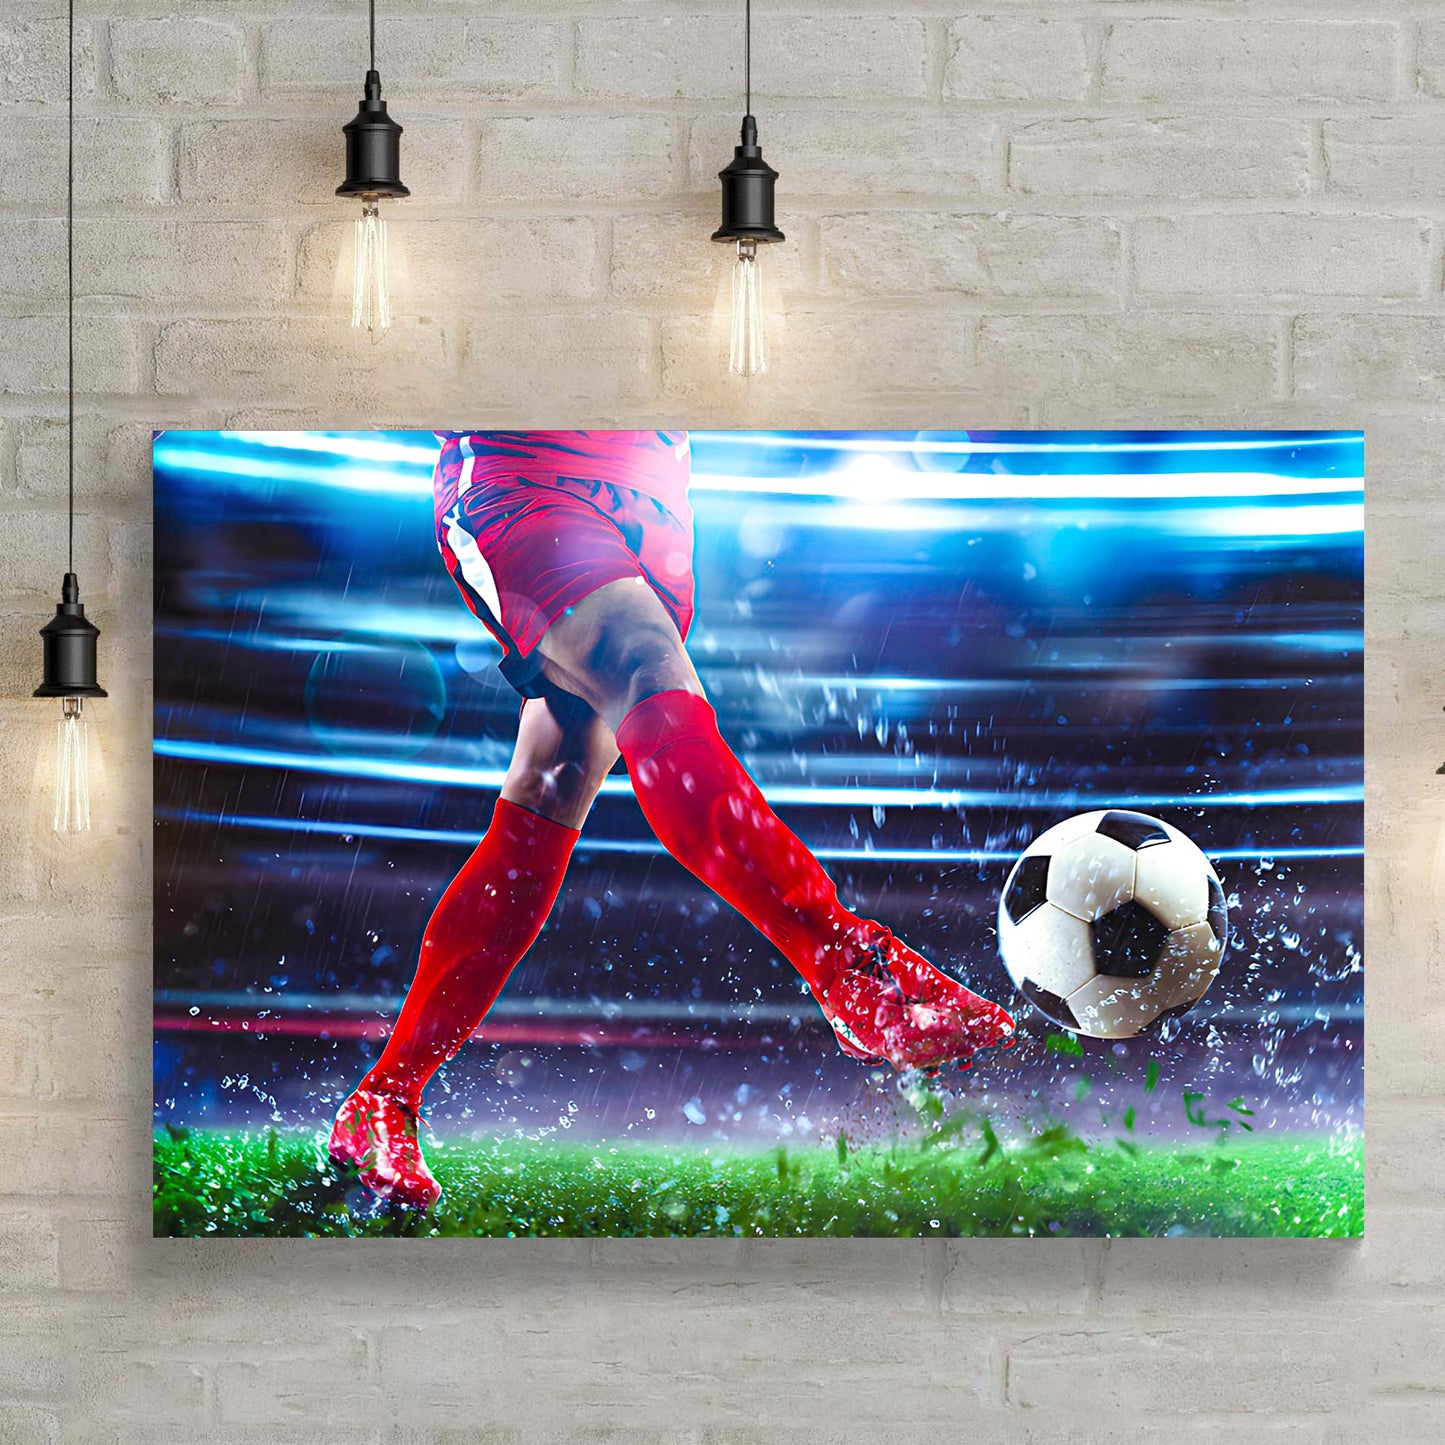 Soccer Kick Grunge Canvas Wall Art Style 1 - Image by Tailored Canvases